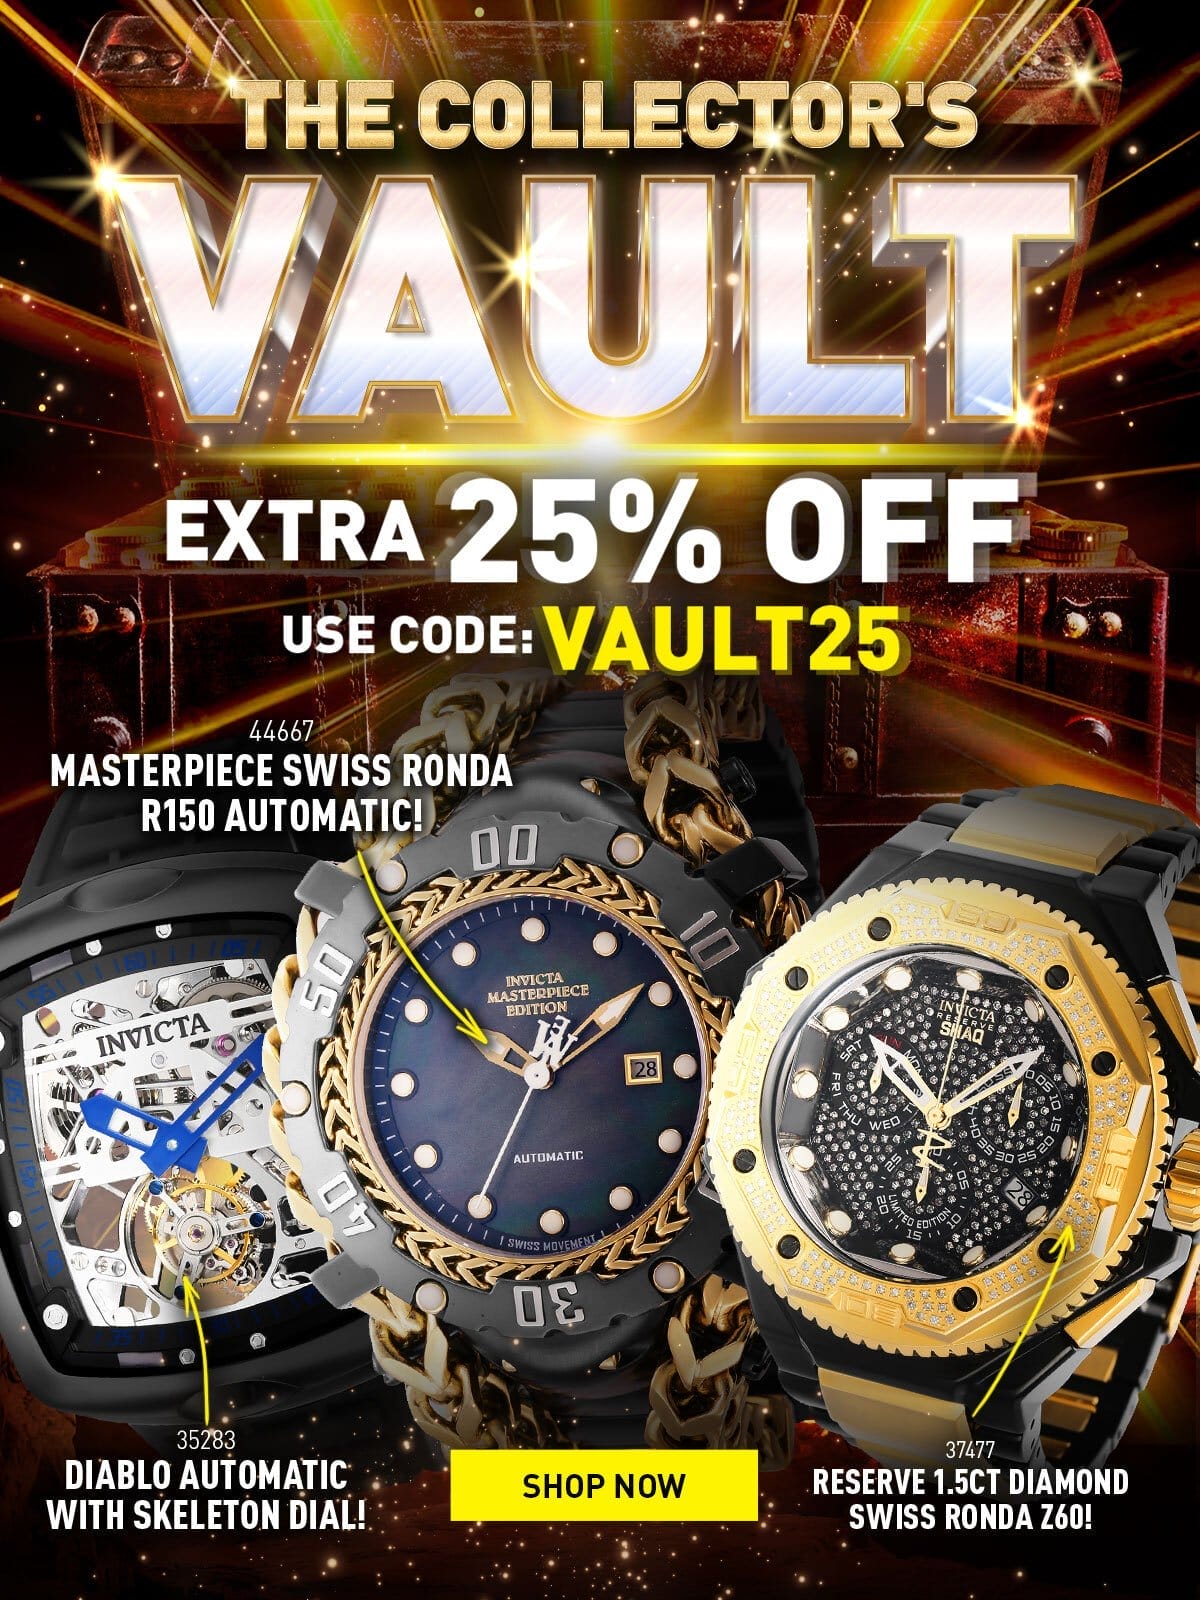 The collector's vault - Extra 25% off